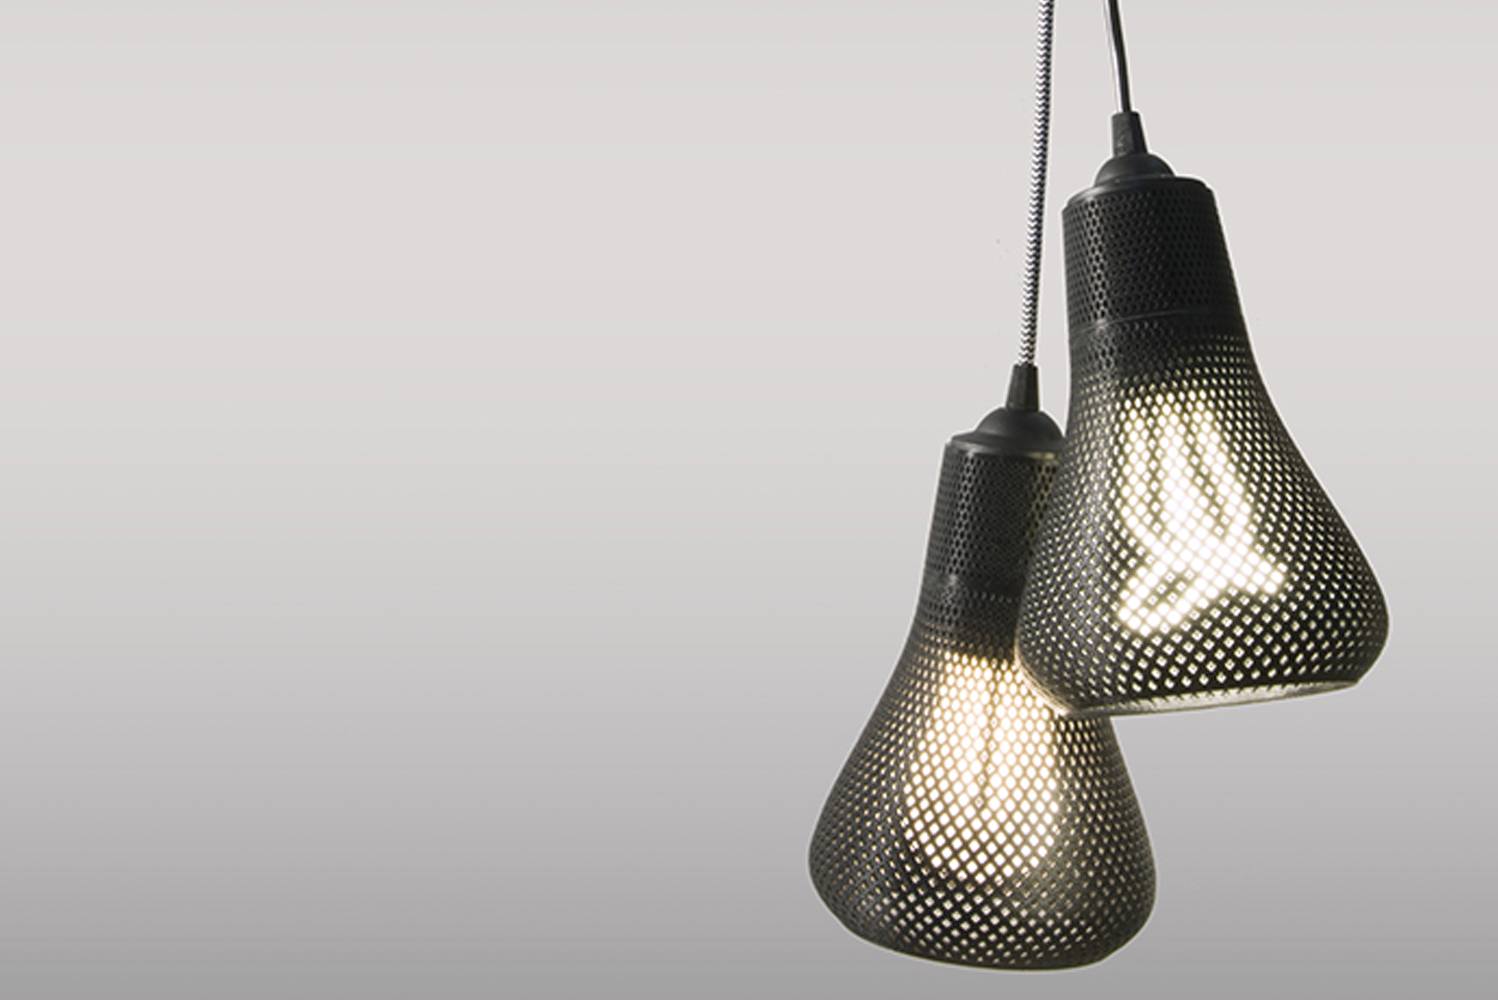 Plumen and Formaliz3d launched Kayan a brand new 3D-printed pendant lights 